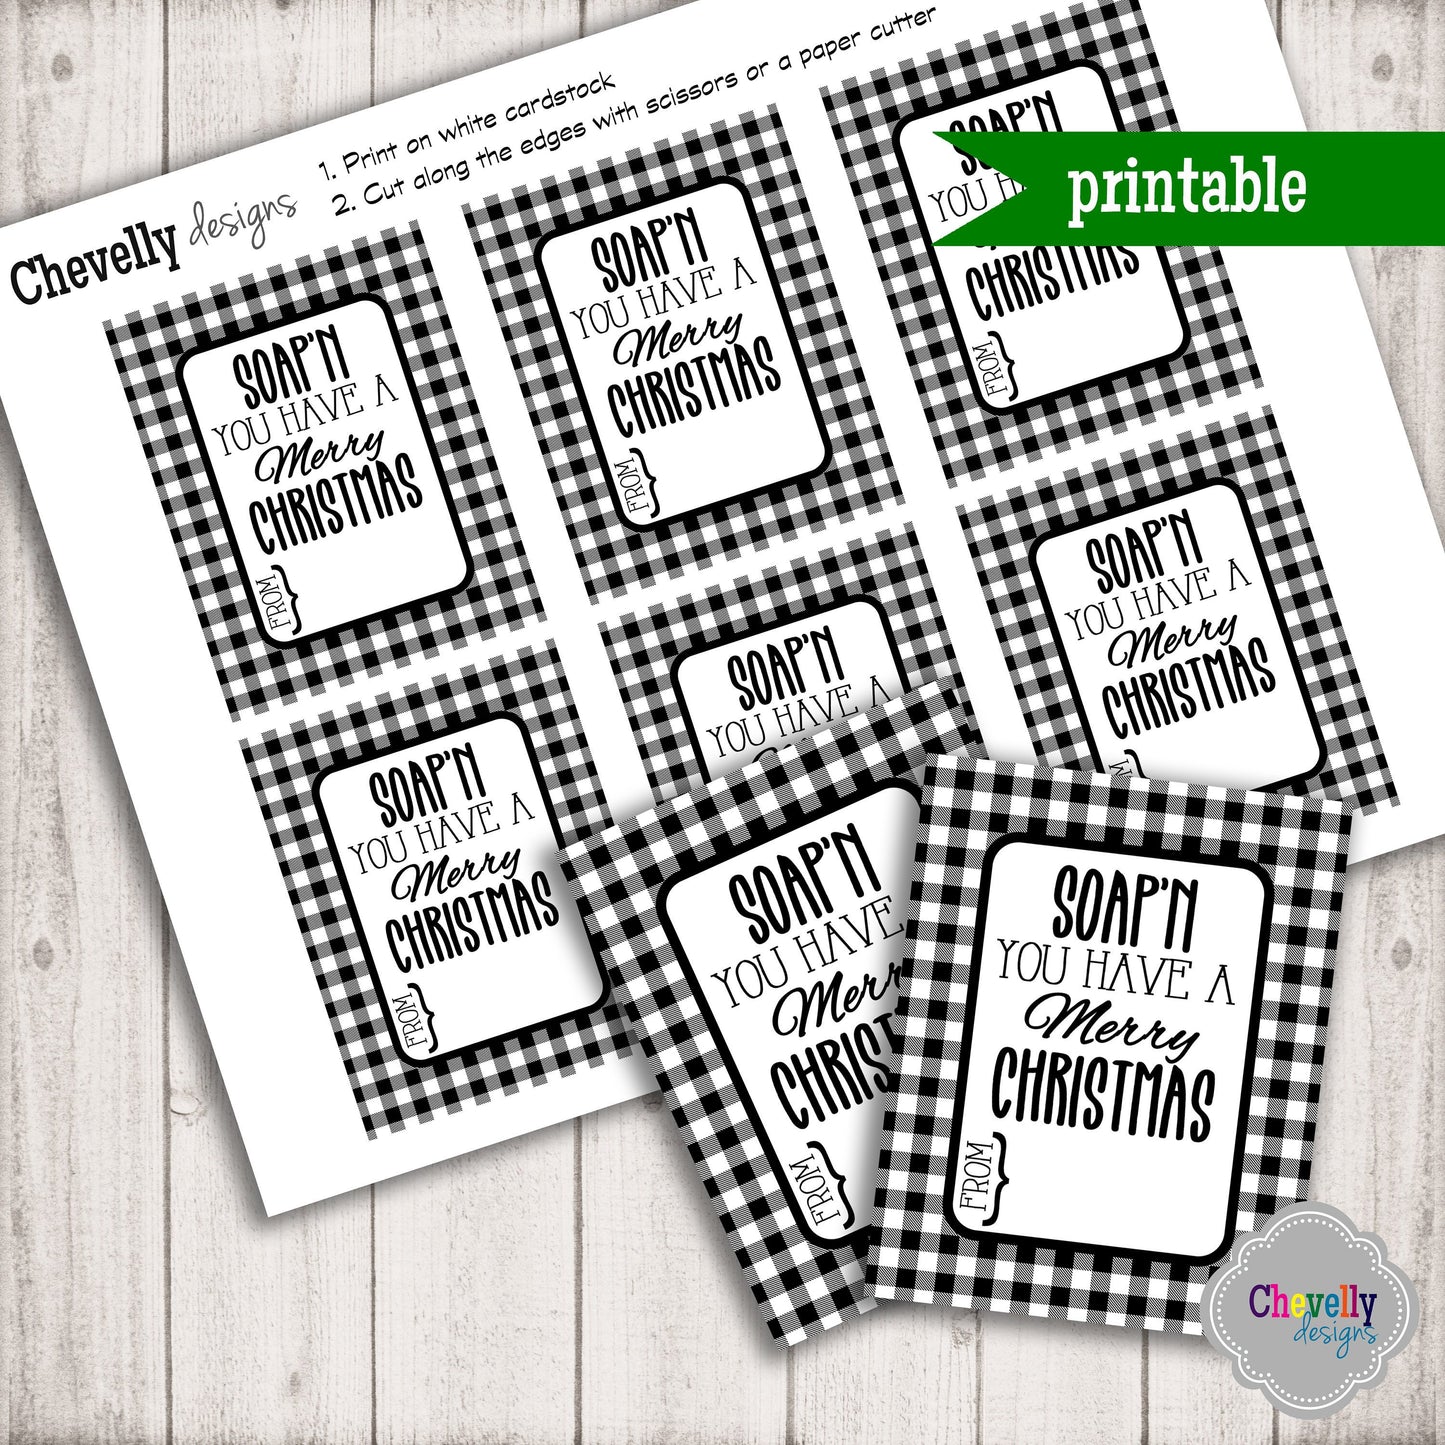 Soap'n You Have a Merry Christmas Gift Tags - Black/White Buffalo Check >>>Instant Digital Download<<<